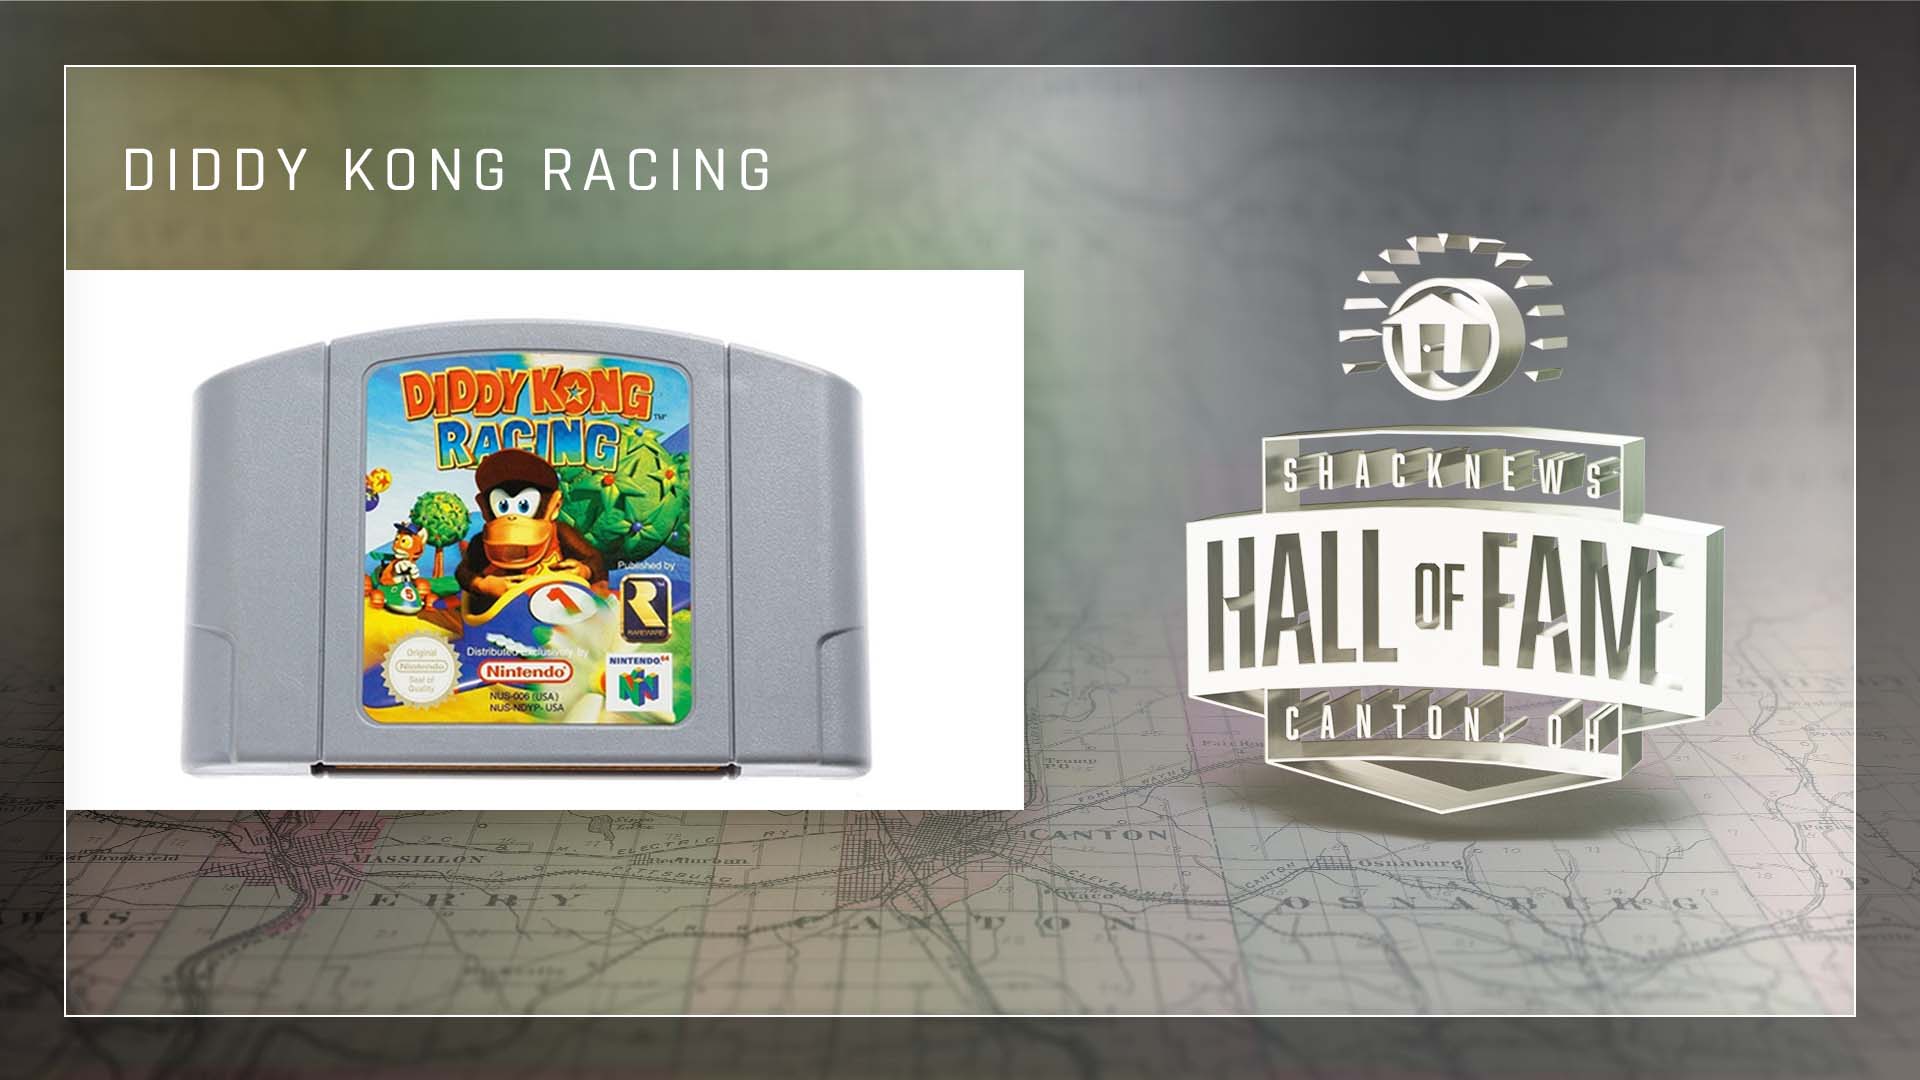 The Shacknews Hall of Fame welcomes Diddy Kong Racing into its inaugural class.